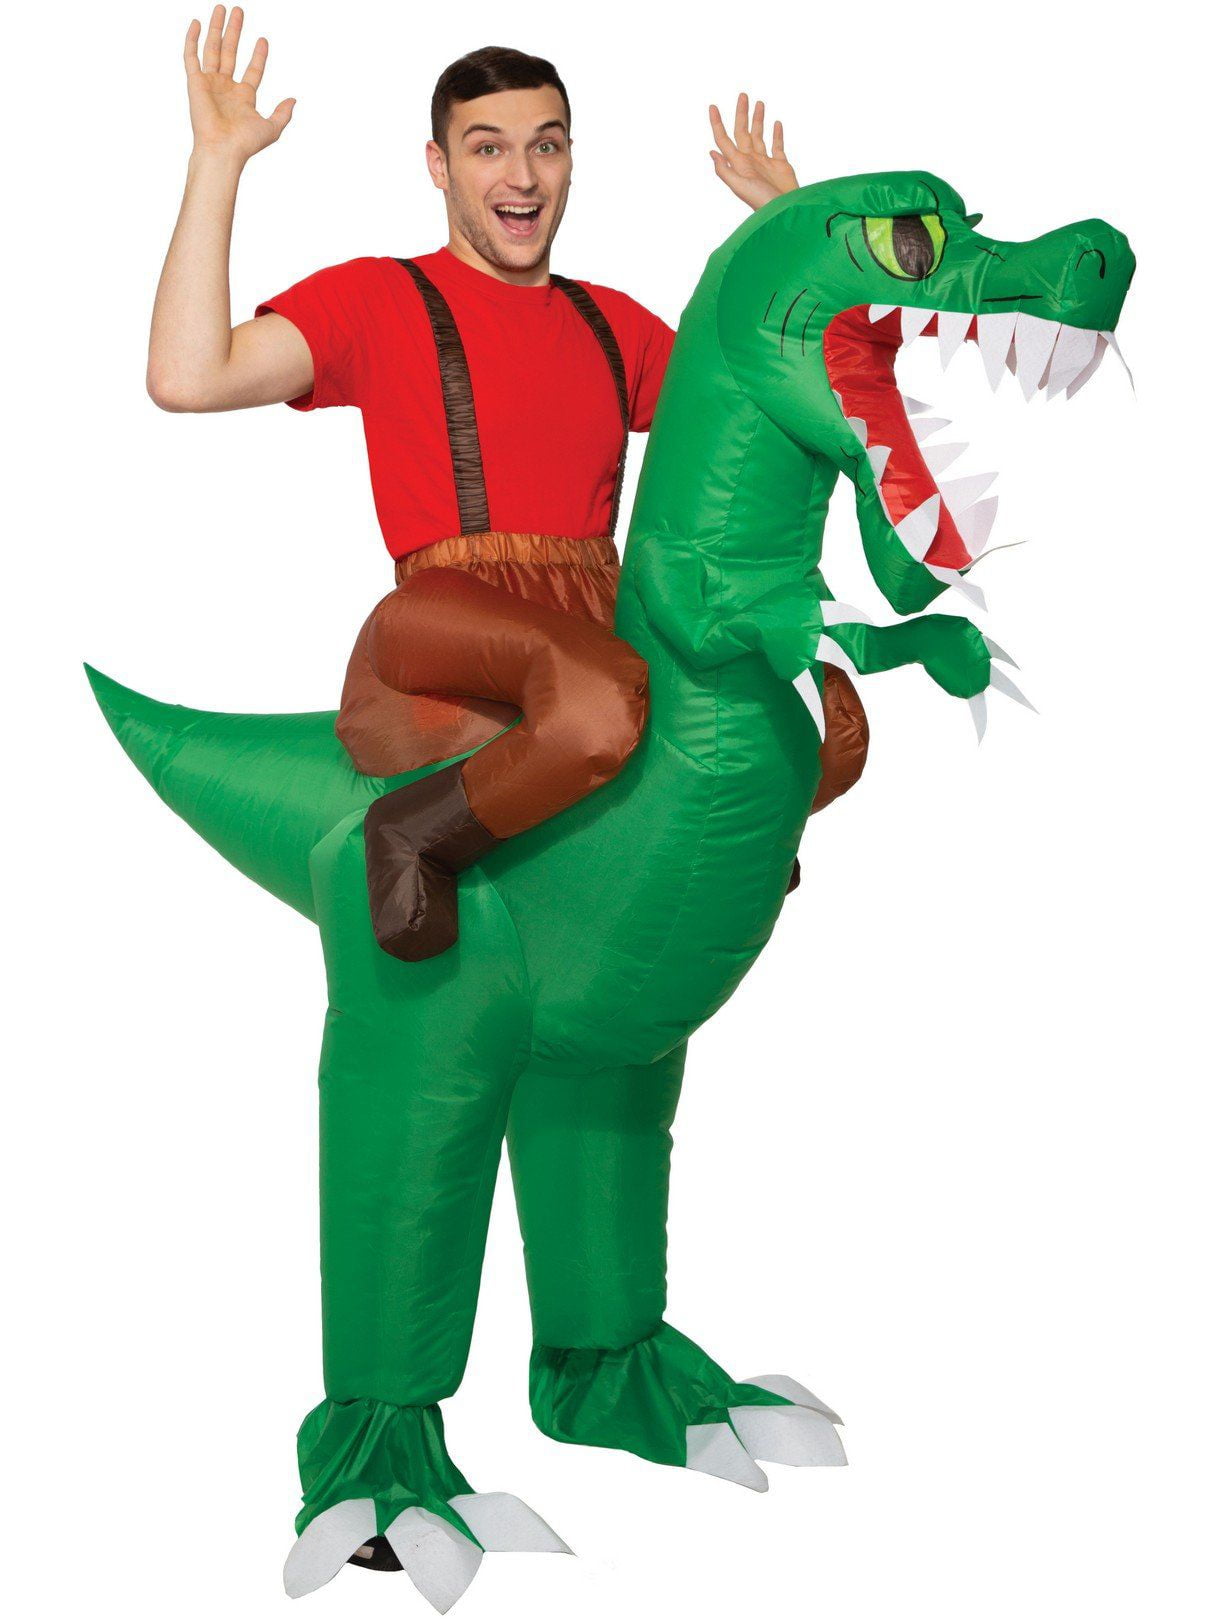 MXoSUM Newest Dinosaur Costume for Adults Inflatable Spinosaurus Costume Blow up Halloween Costumes Carnival Party Cosplay Fancy Dress 